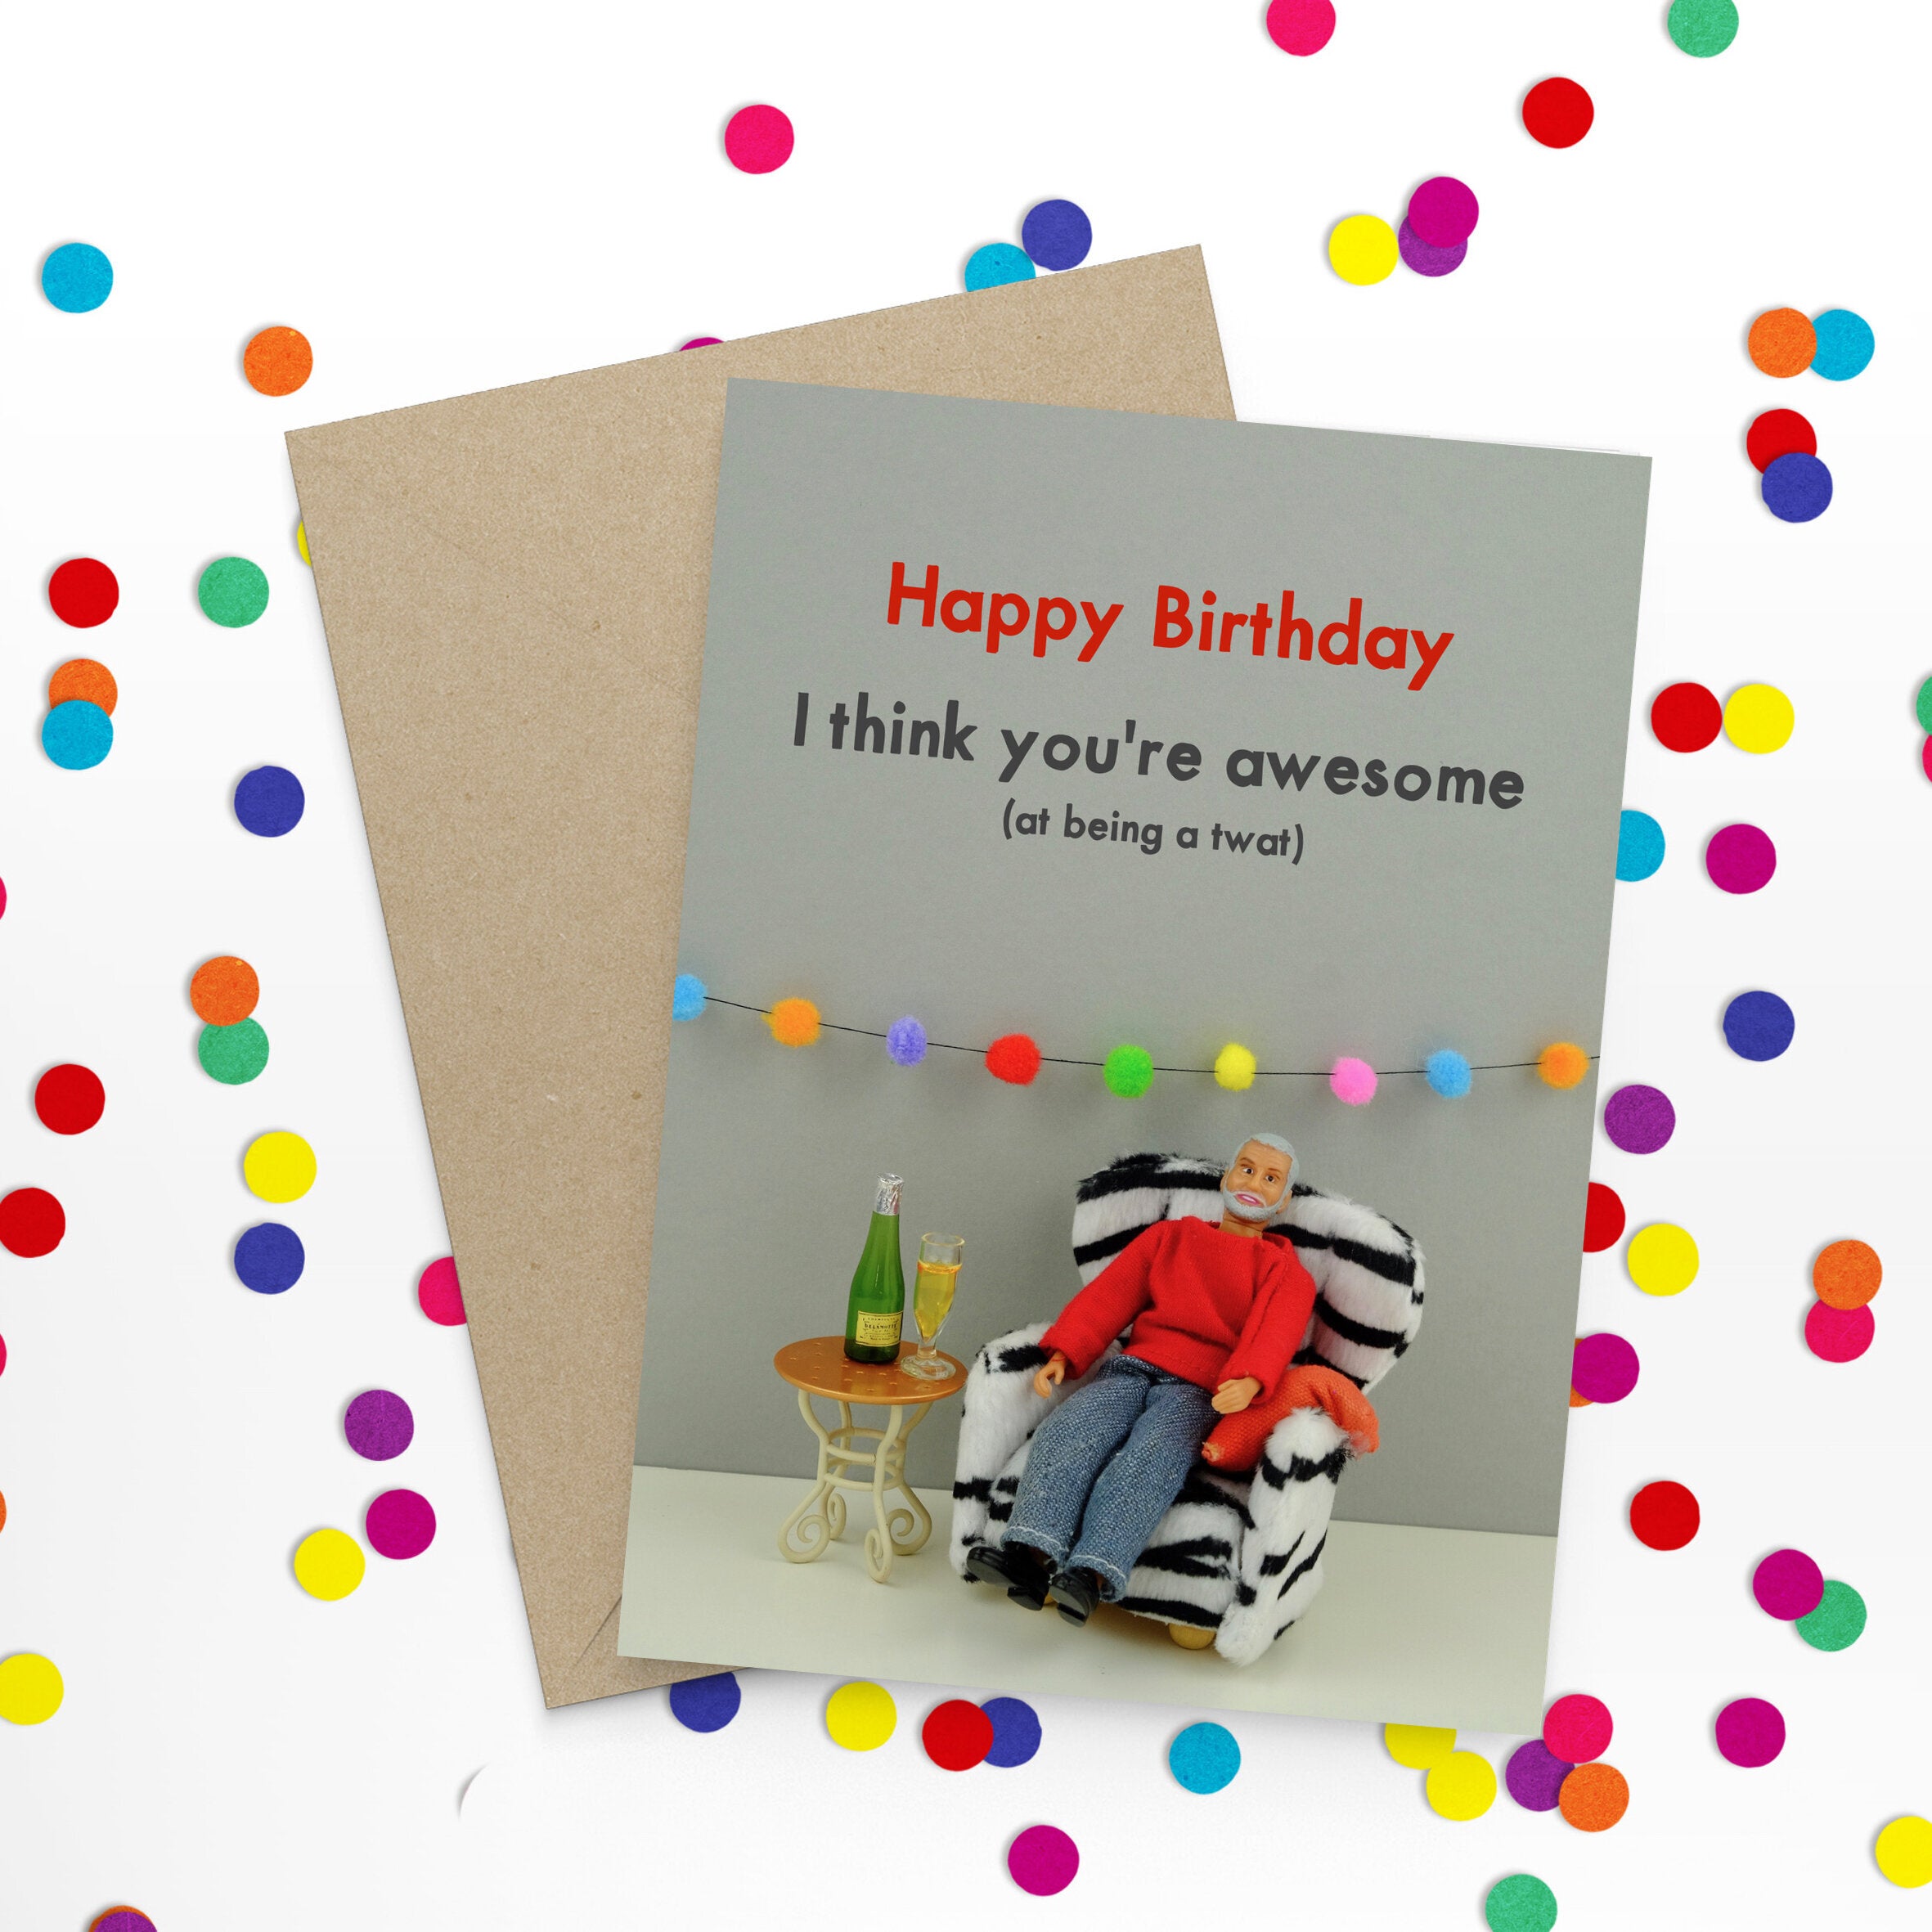 Happy Birthday I Think You're Awesome (at being a twat) Greetings Card by Bold and Bright